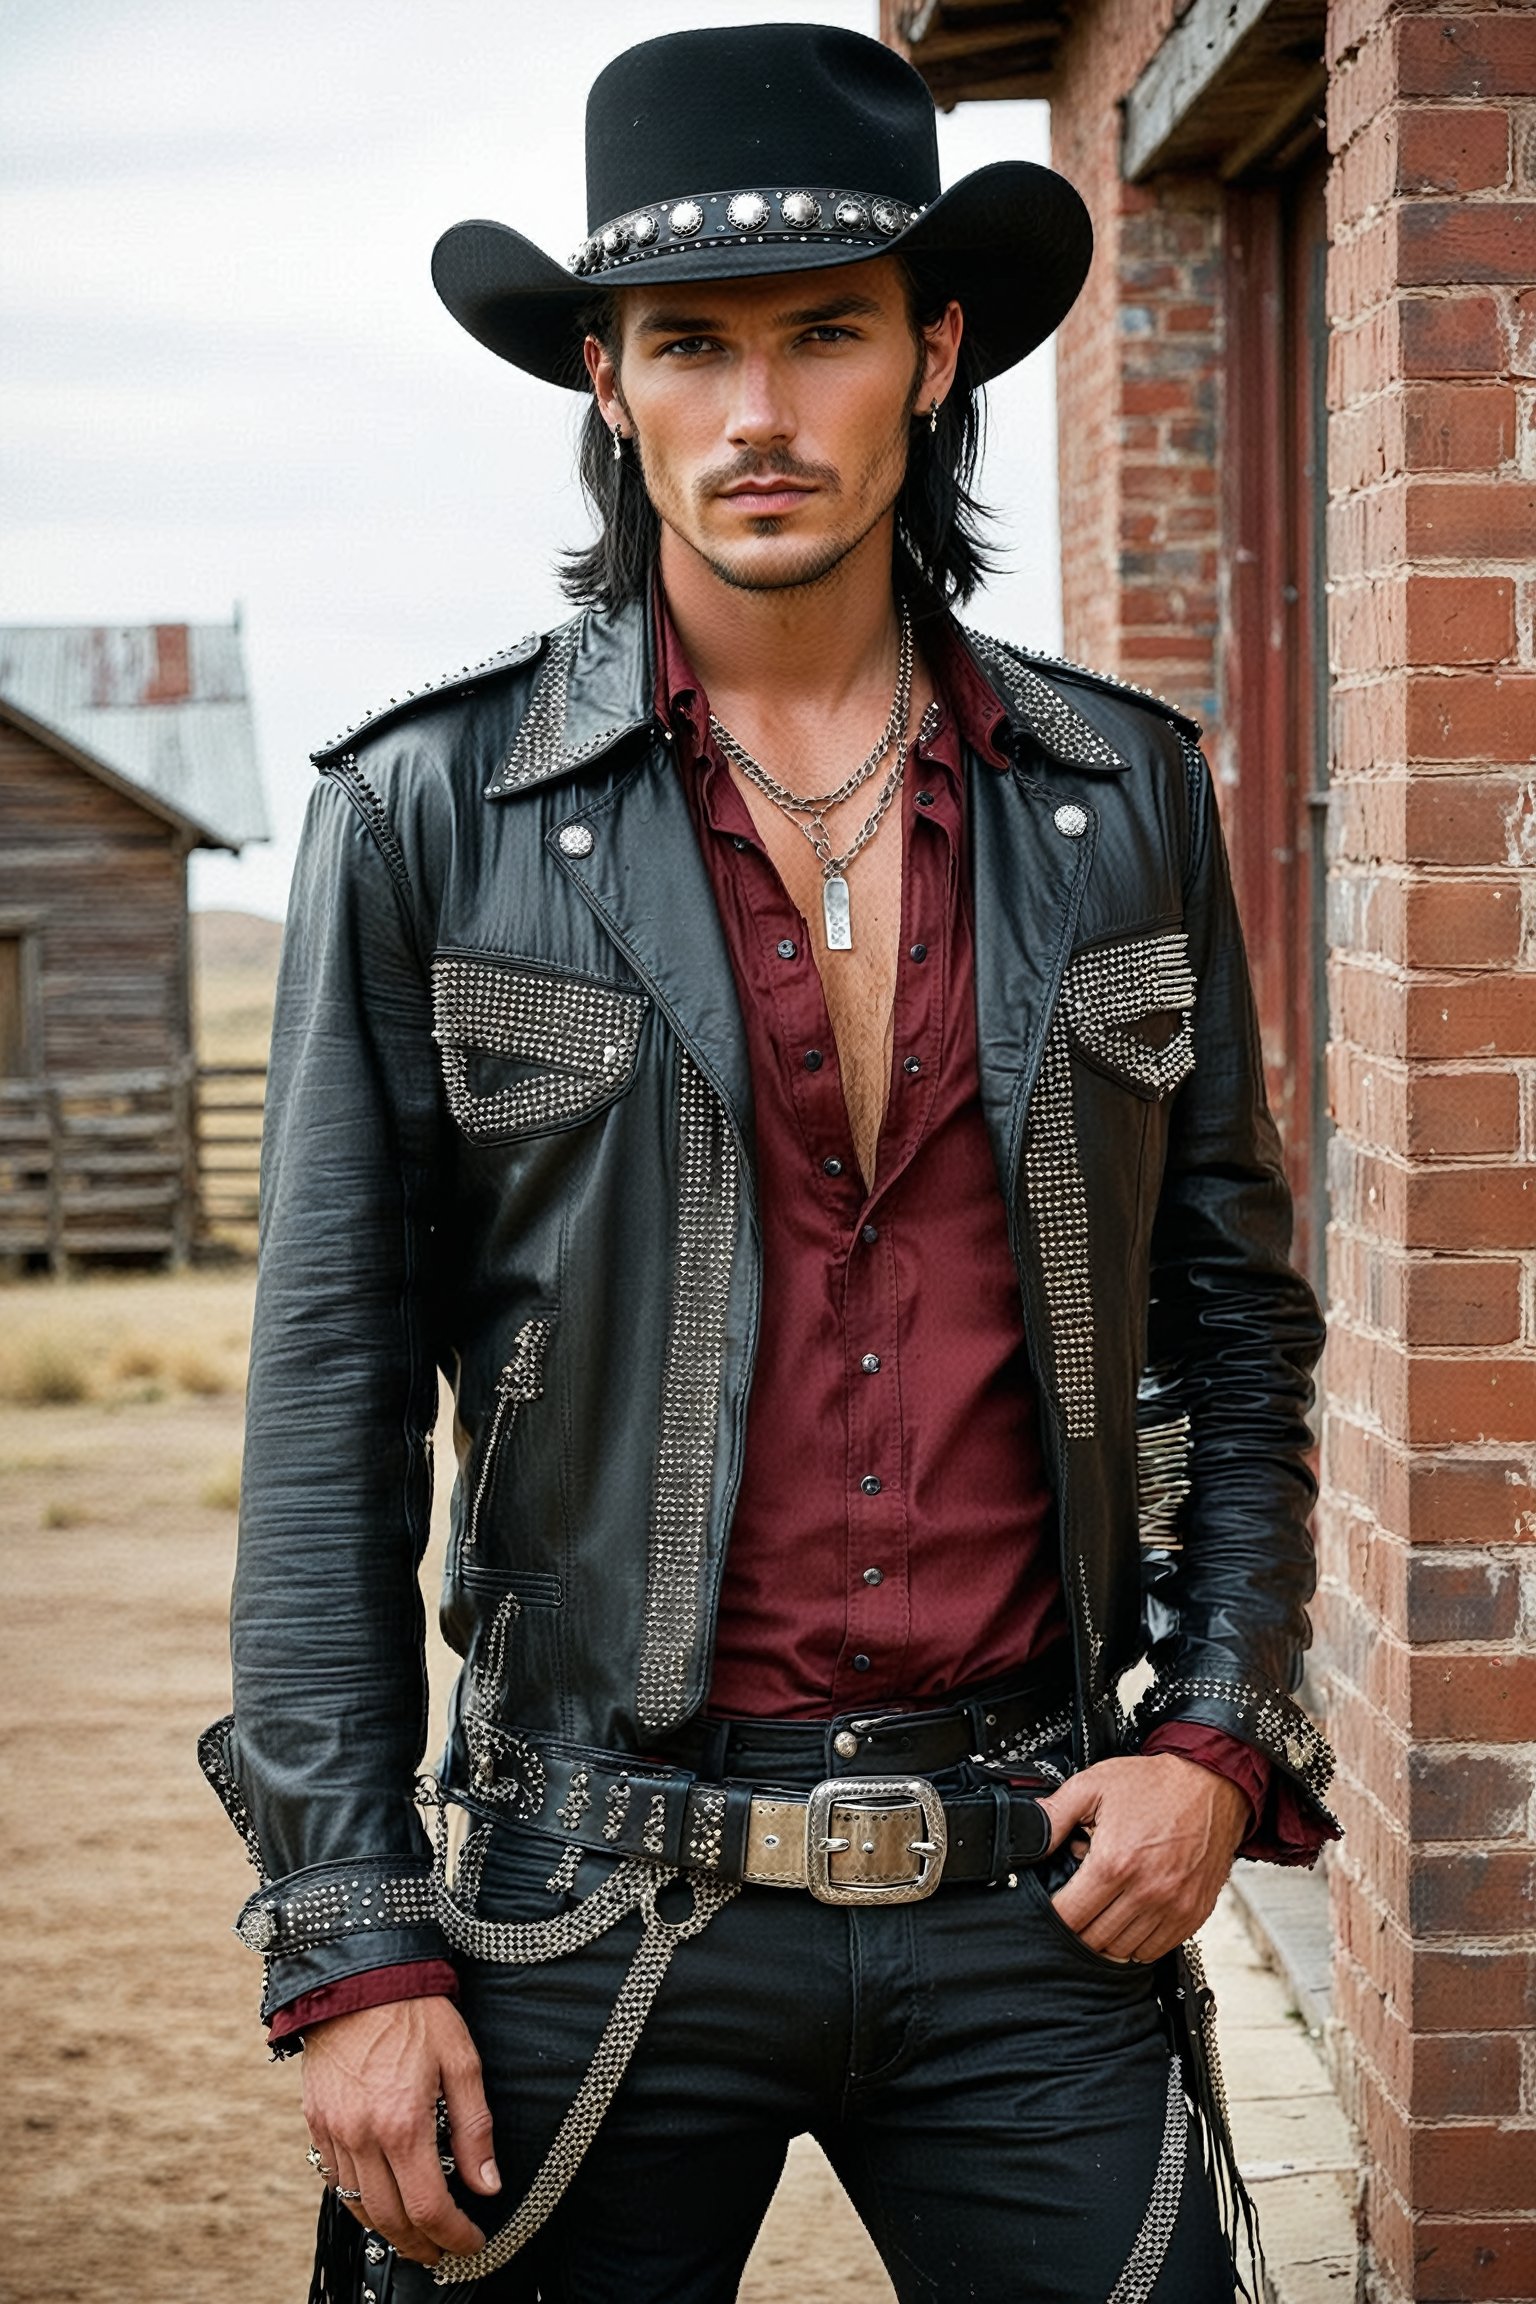  dandy man, in a Gothic punk-inspired cowboy outfit, He wears a black wide-brimmed cowboy hat with silver studs and a dark feather, a tailored black leather jacket with lace and chain details, and a deep crimson ruffled shirt. His fitted trousers feature metal spikes and buckles, and knee-high leather boots with silver accents and spurs complete the look. An ornate studded belt holds a sleek, engraved revolver. This blend of rugged Western charm and edgy punk sophistication creates a striking and unforgettable figure.,Handsome boy